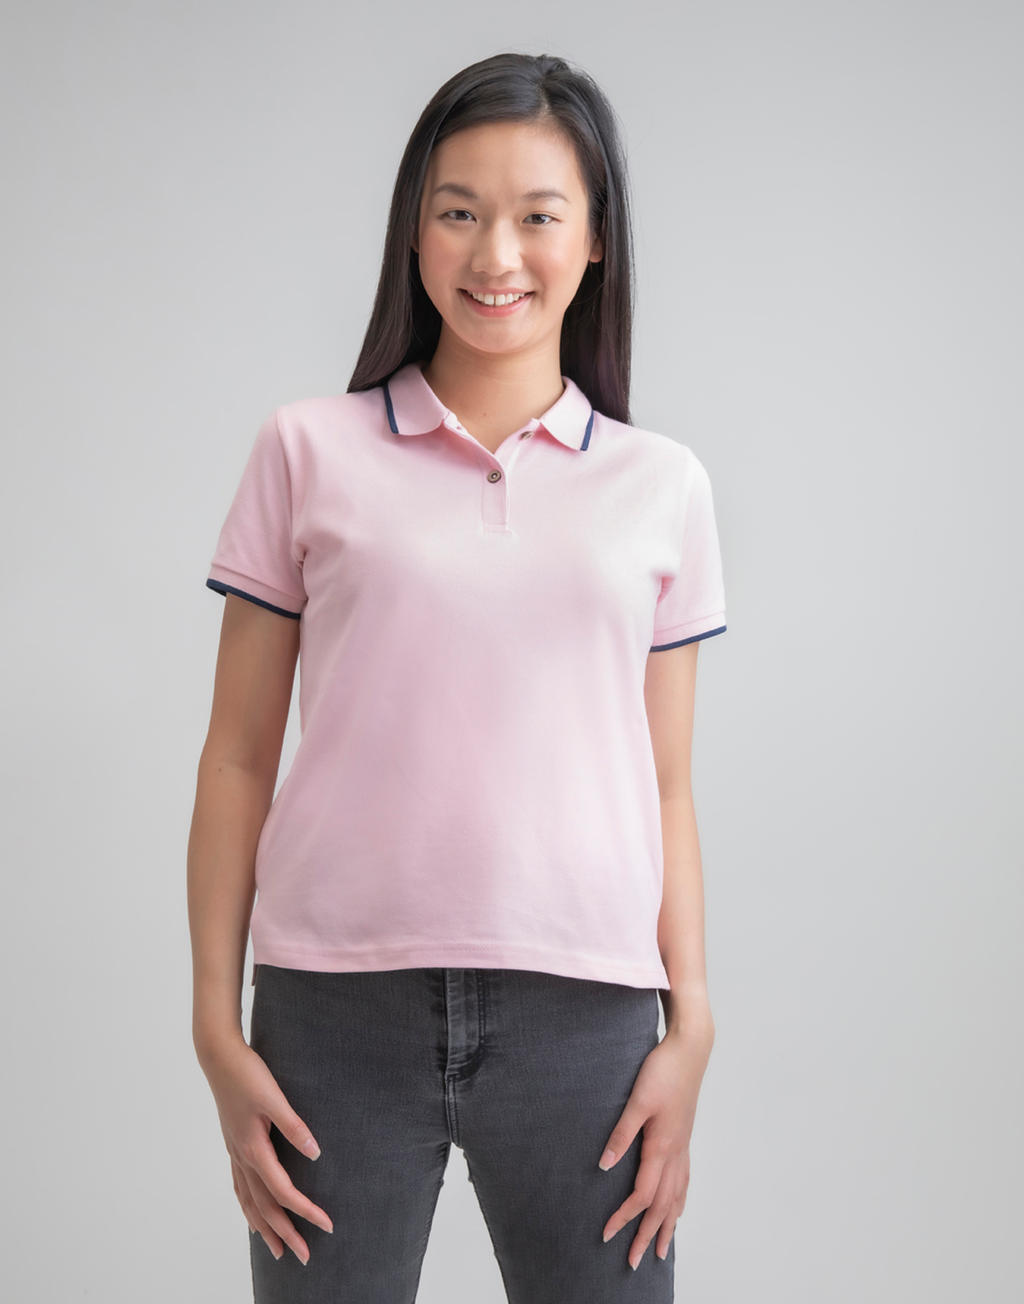  The Women?s Tipped Polo in Farbe White/Navy